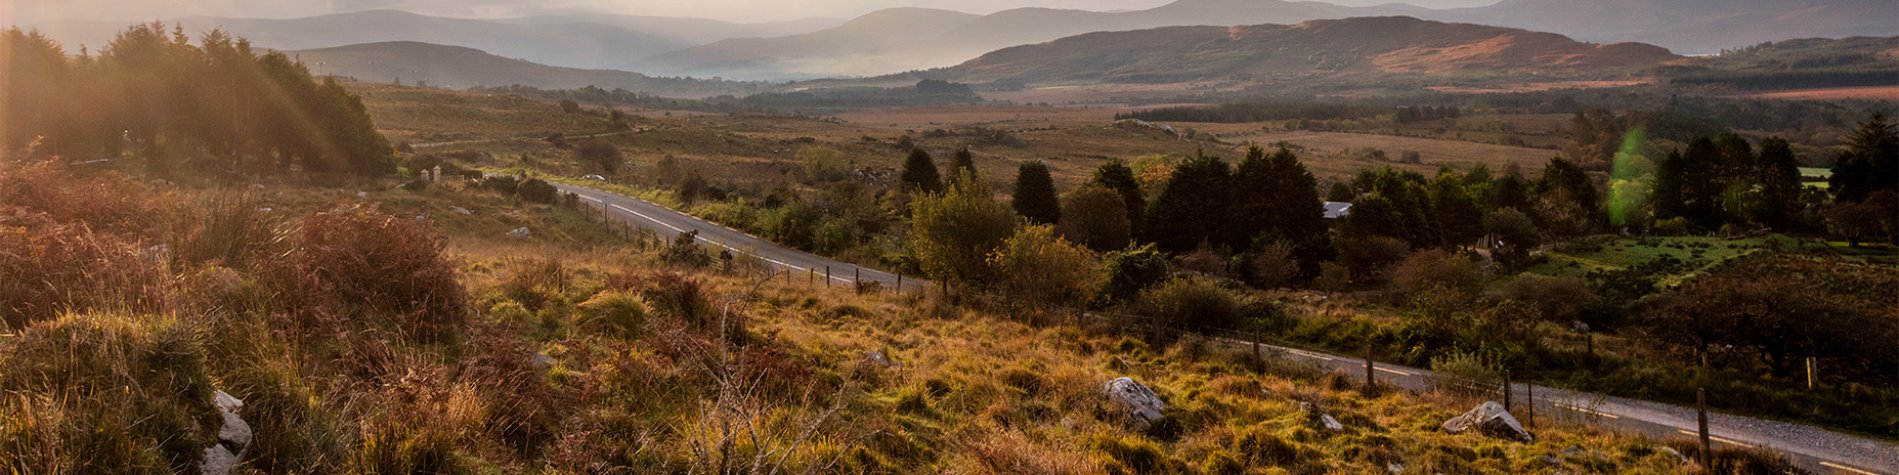 Day Trips From Dublin All Over Ireland For Groups Co. Kerry Road